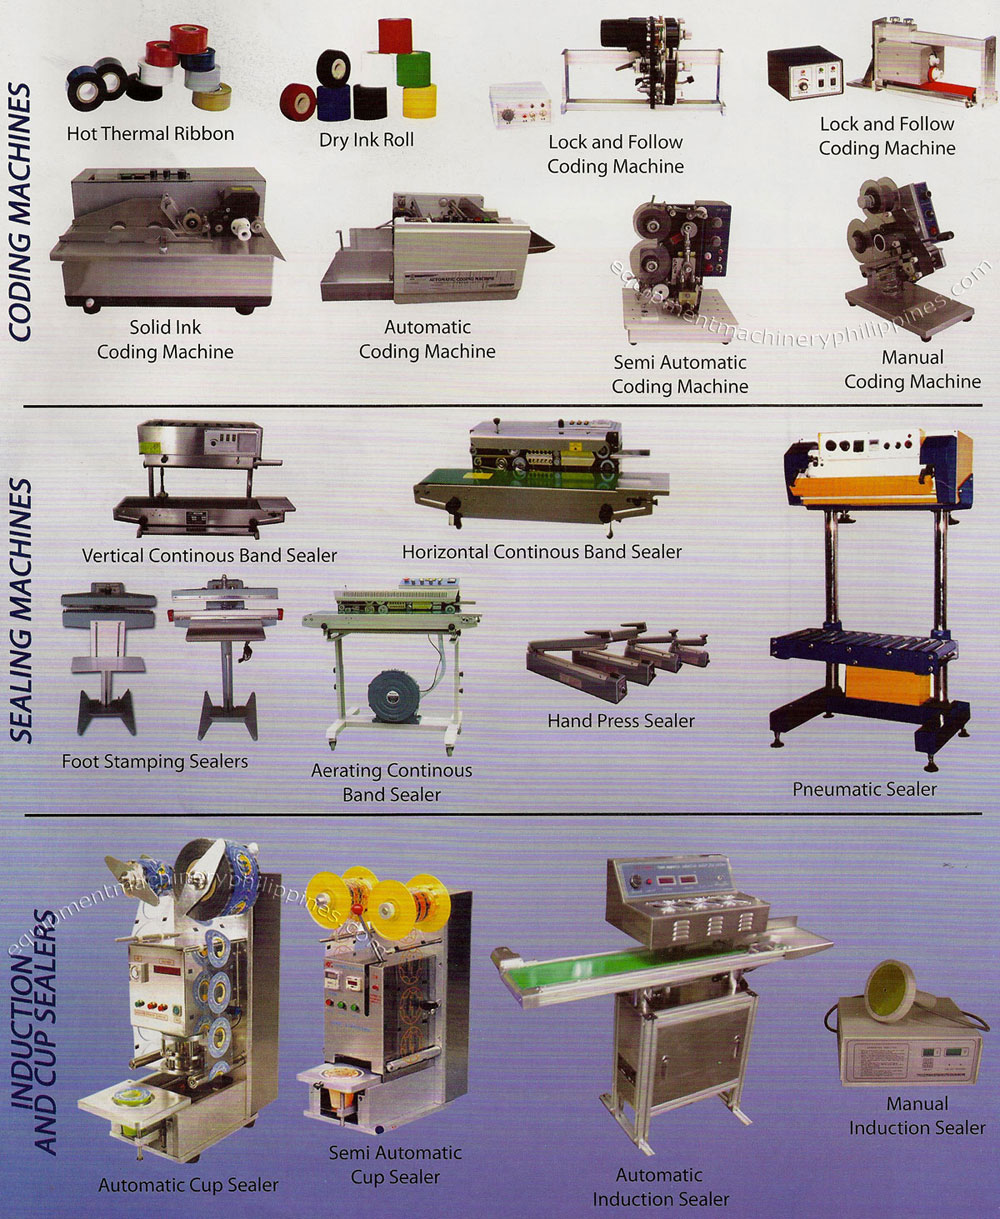 Coding Machines, Sealing Machines, Induction and Cup Sealers